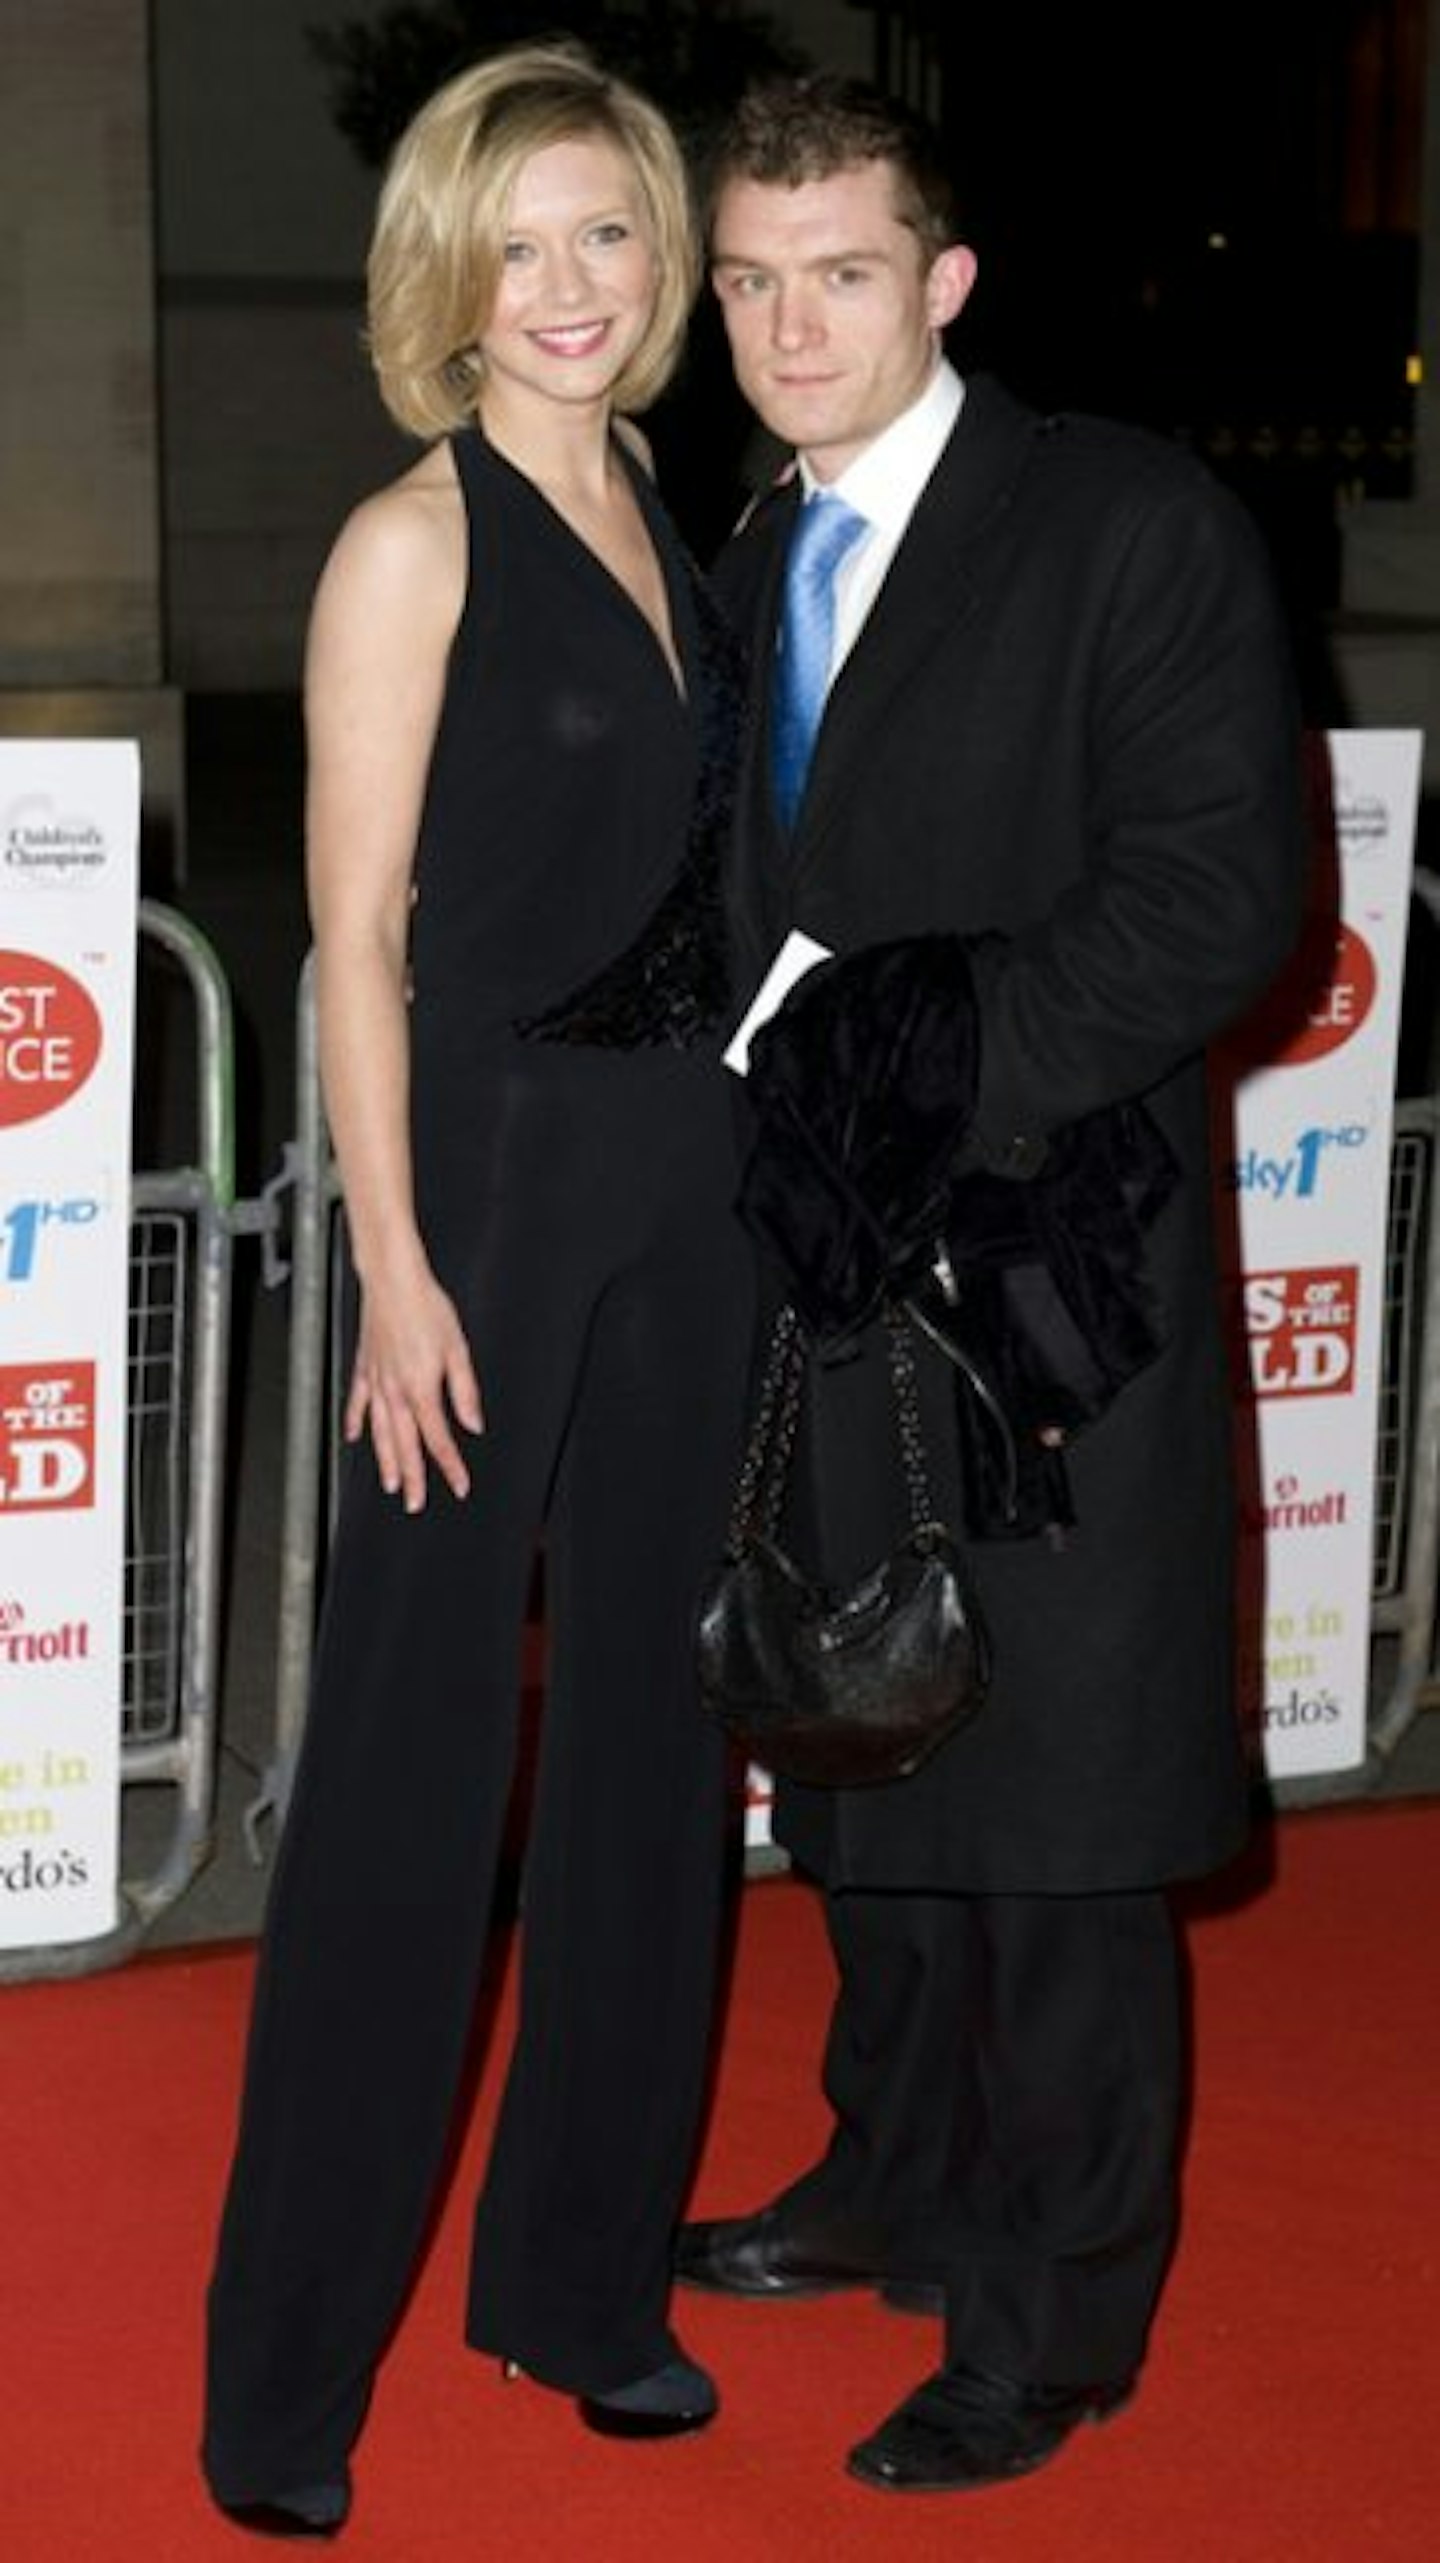 Rachel and Jamie pictured in 2010